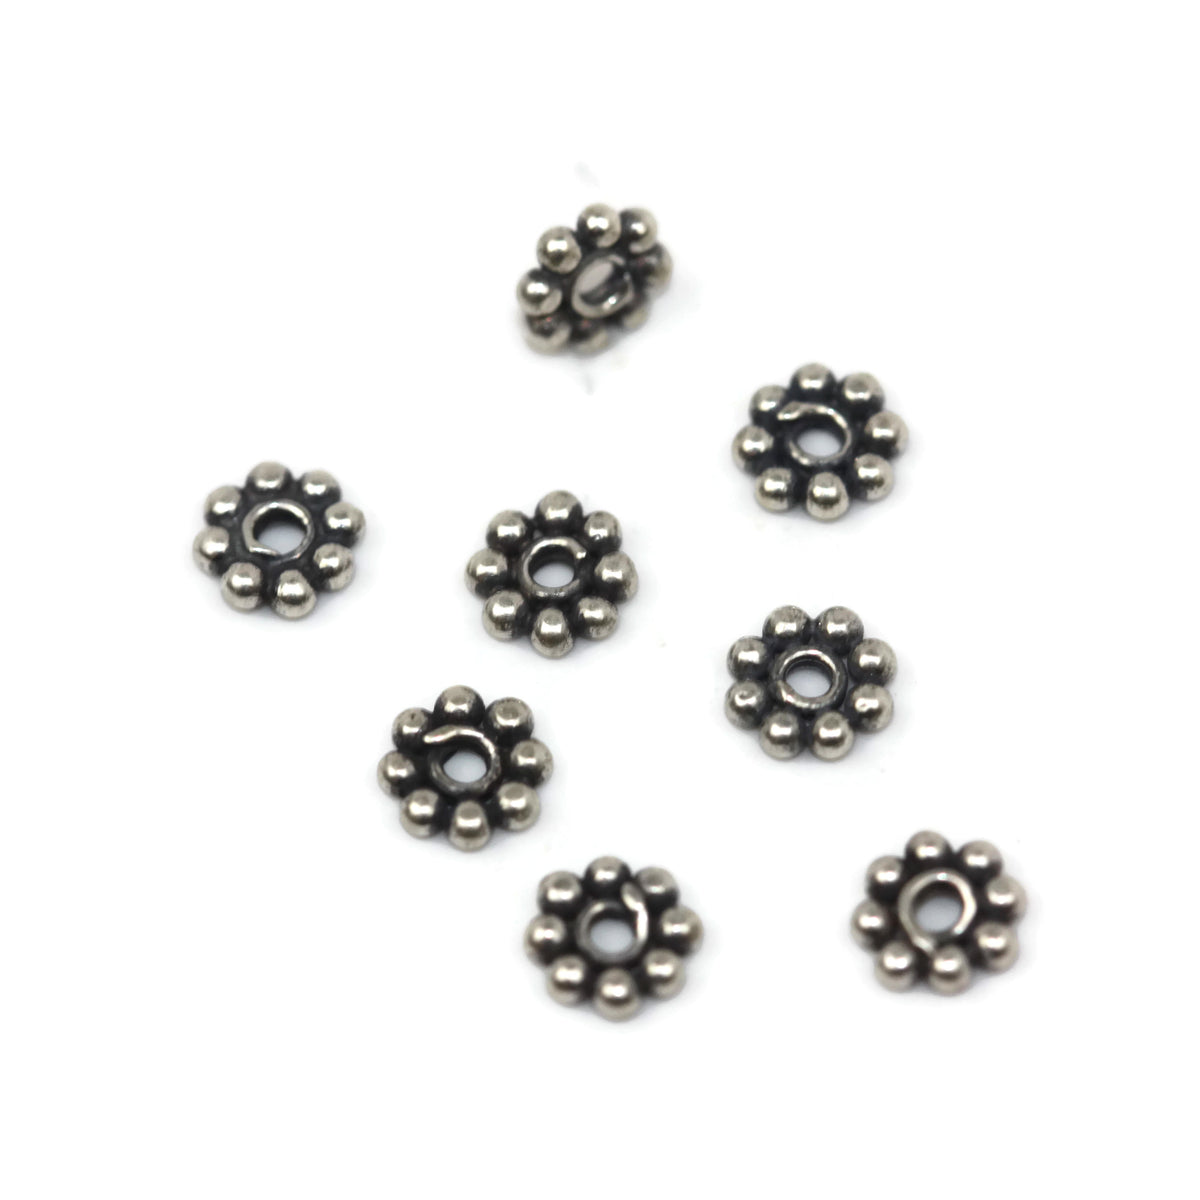 Bali Bead Sterling Silver Daisy Spacer Bead 4 mm